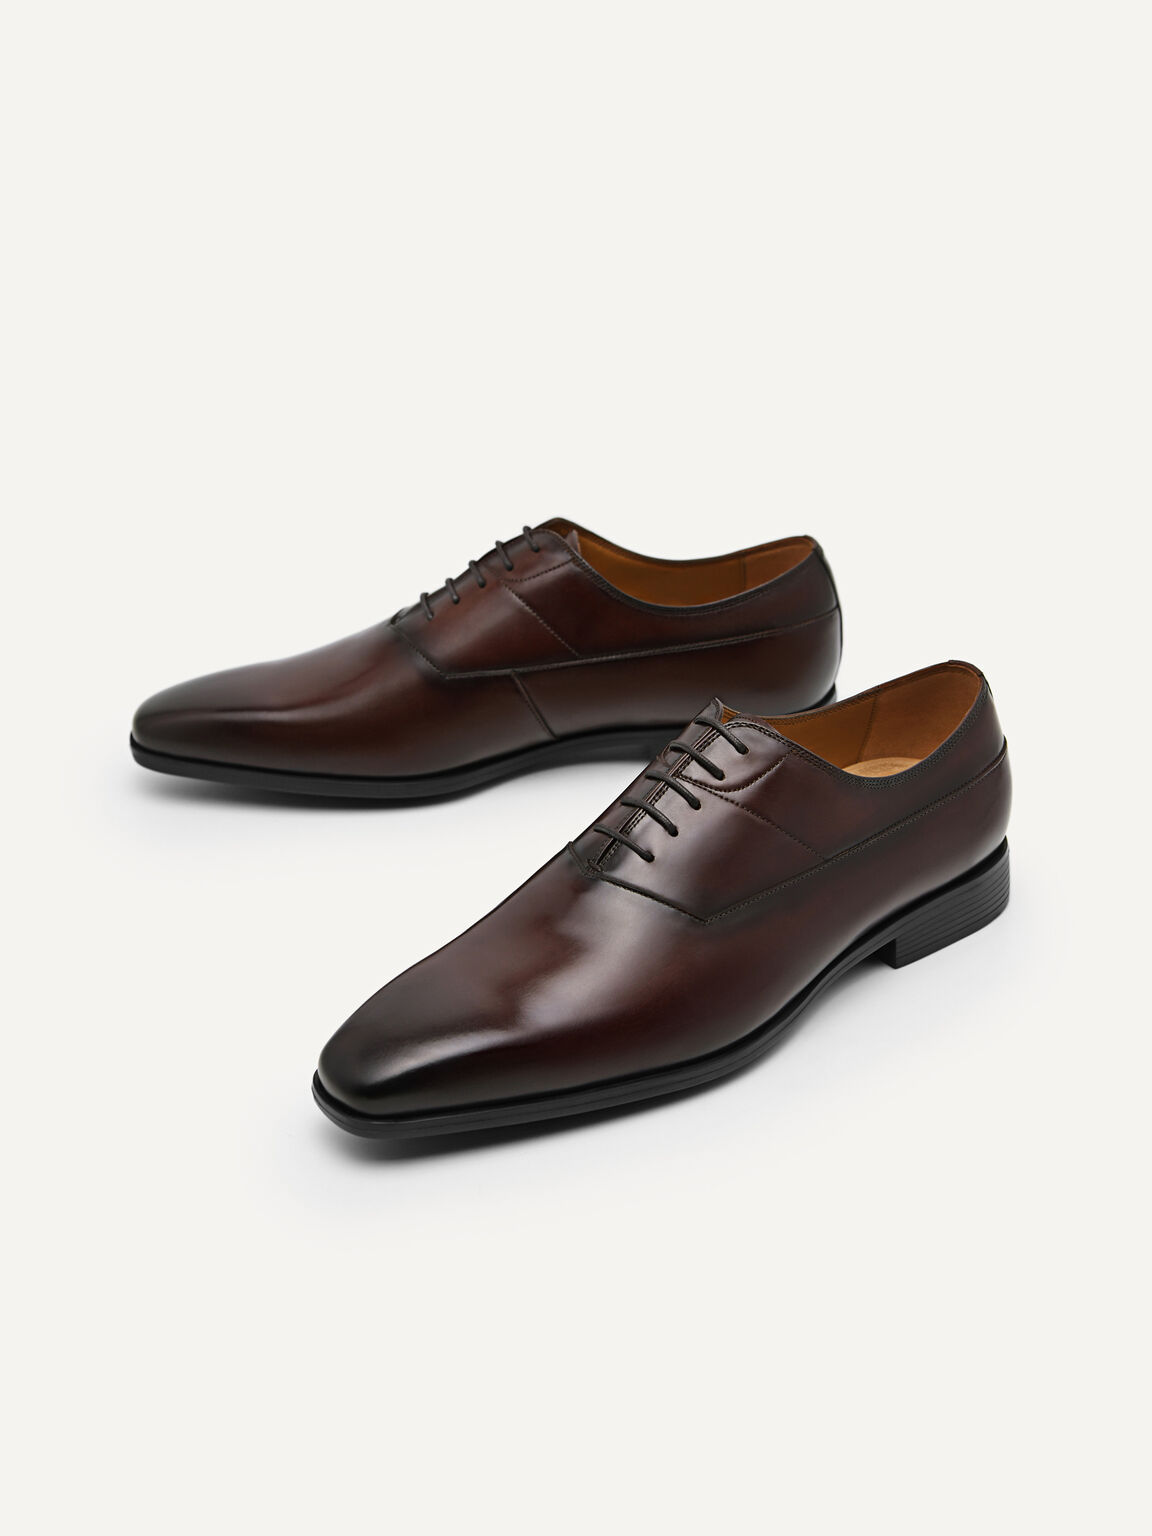 Altitude Leather Oxfords, Brown, hi-res